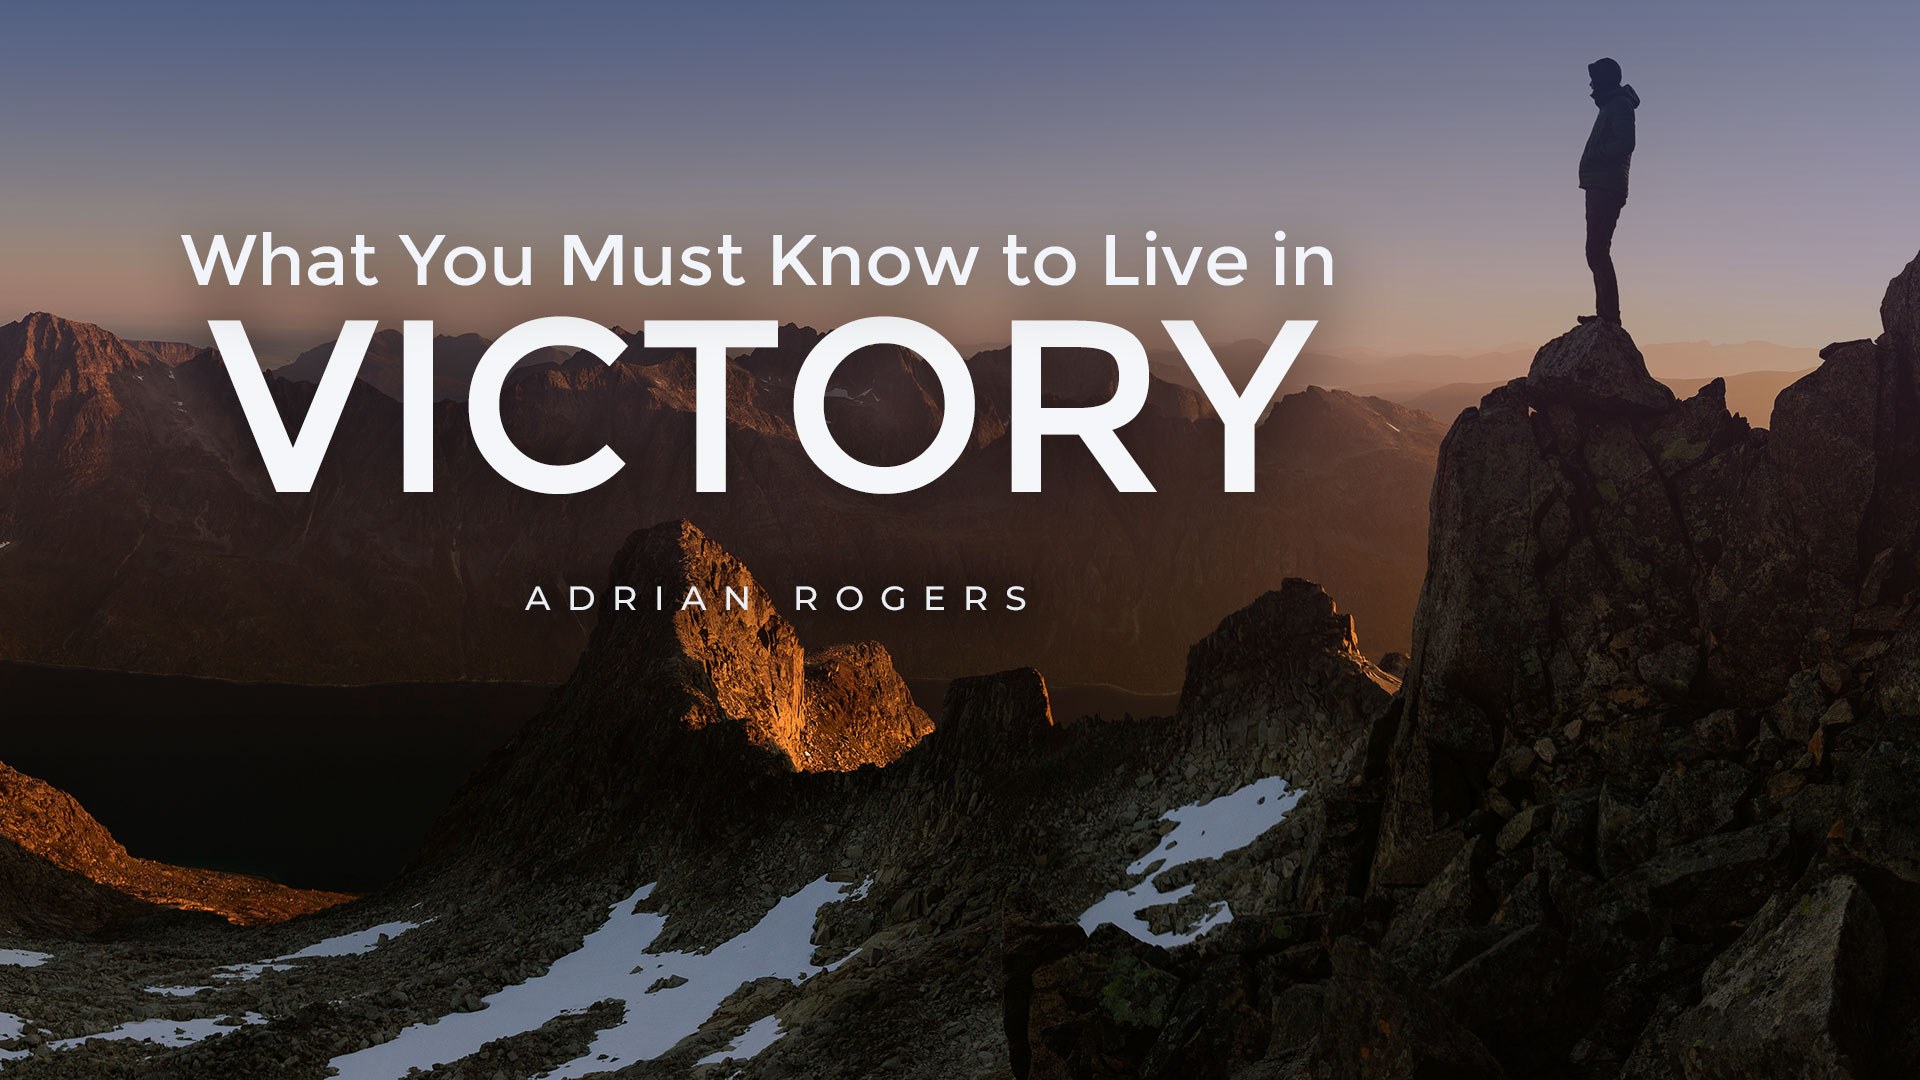 What You Must Know to Live in Victory 1920x1080